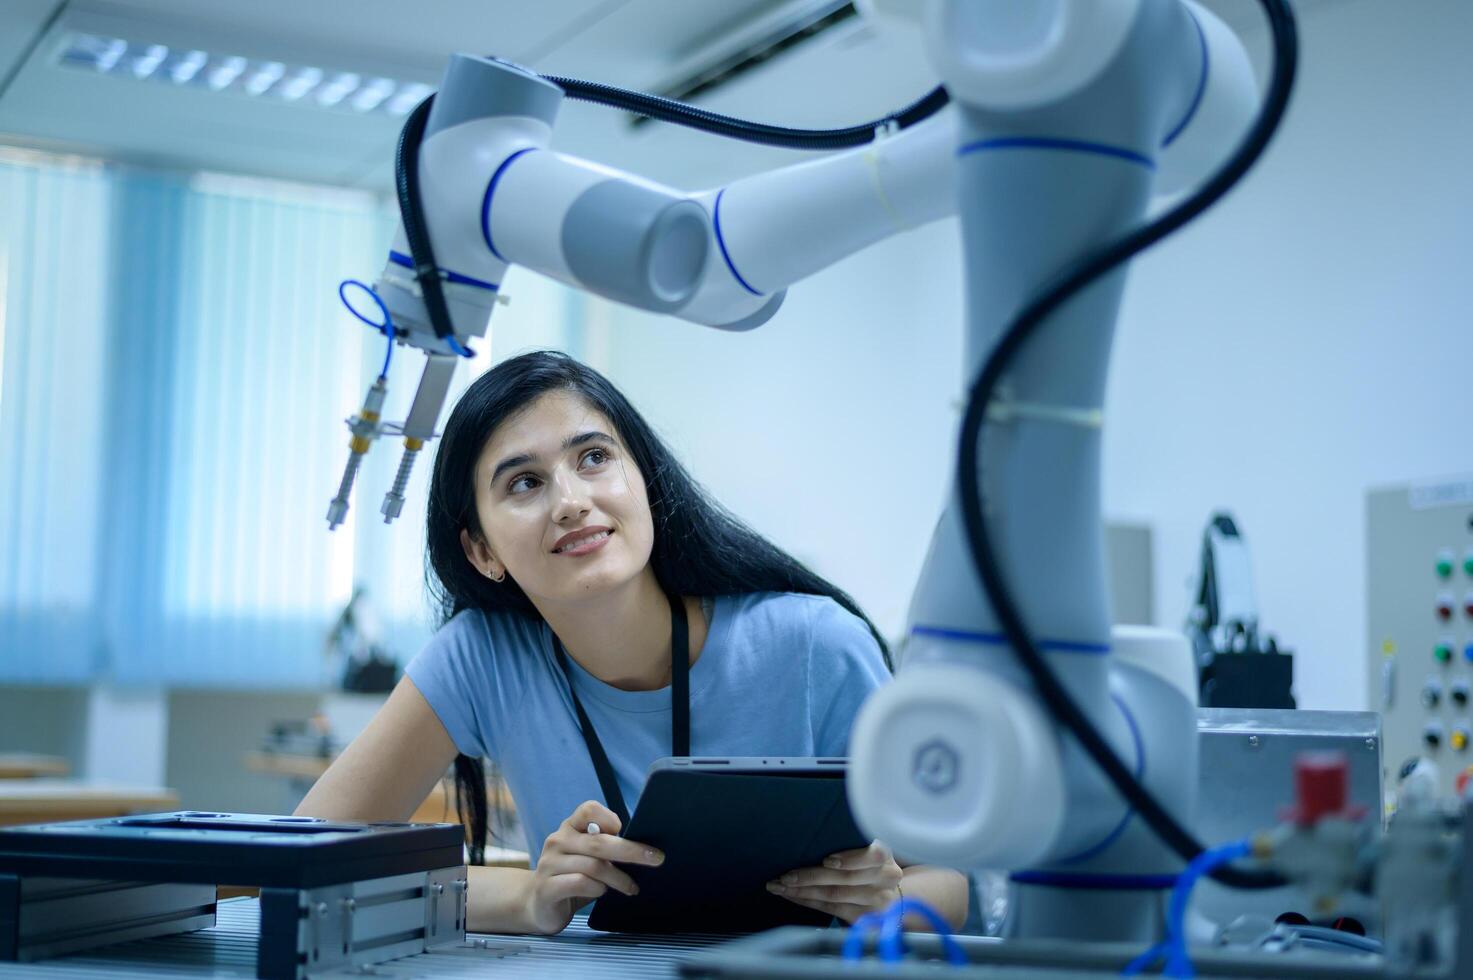 Female Robotics engineer working with Programming and Manipulating Robot Hand, Industrial Robotics Design, High Tech Facility, Modern Machine Learning. Mass Production Automatics. photo